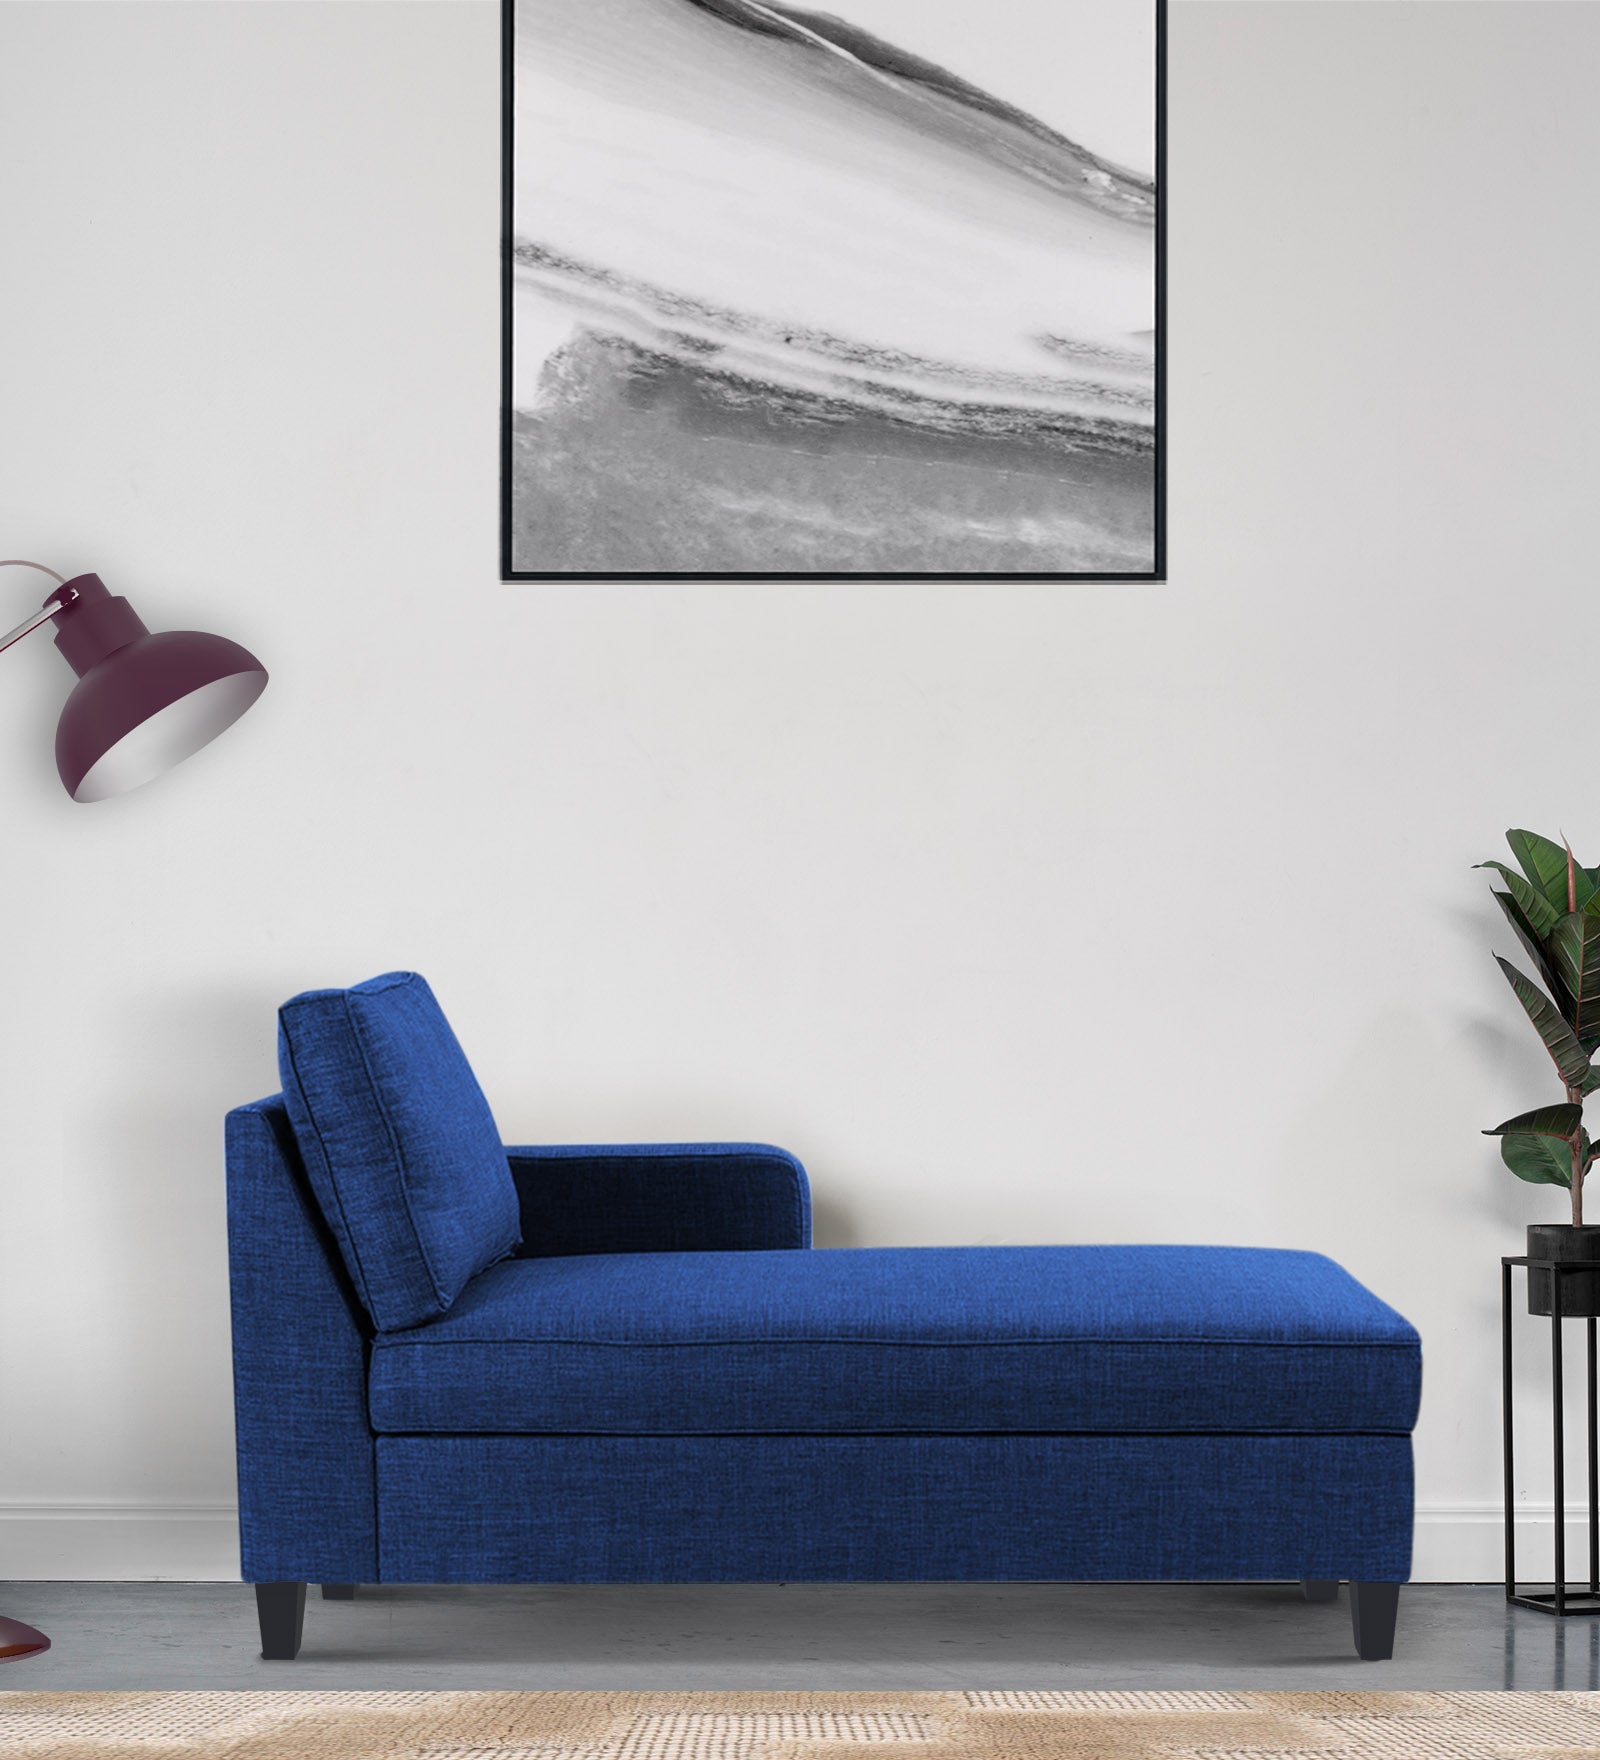 Harry Fabric RHS Chaise Lounger in Royal Blue Colour